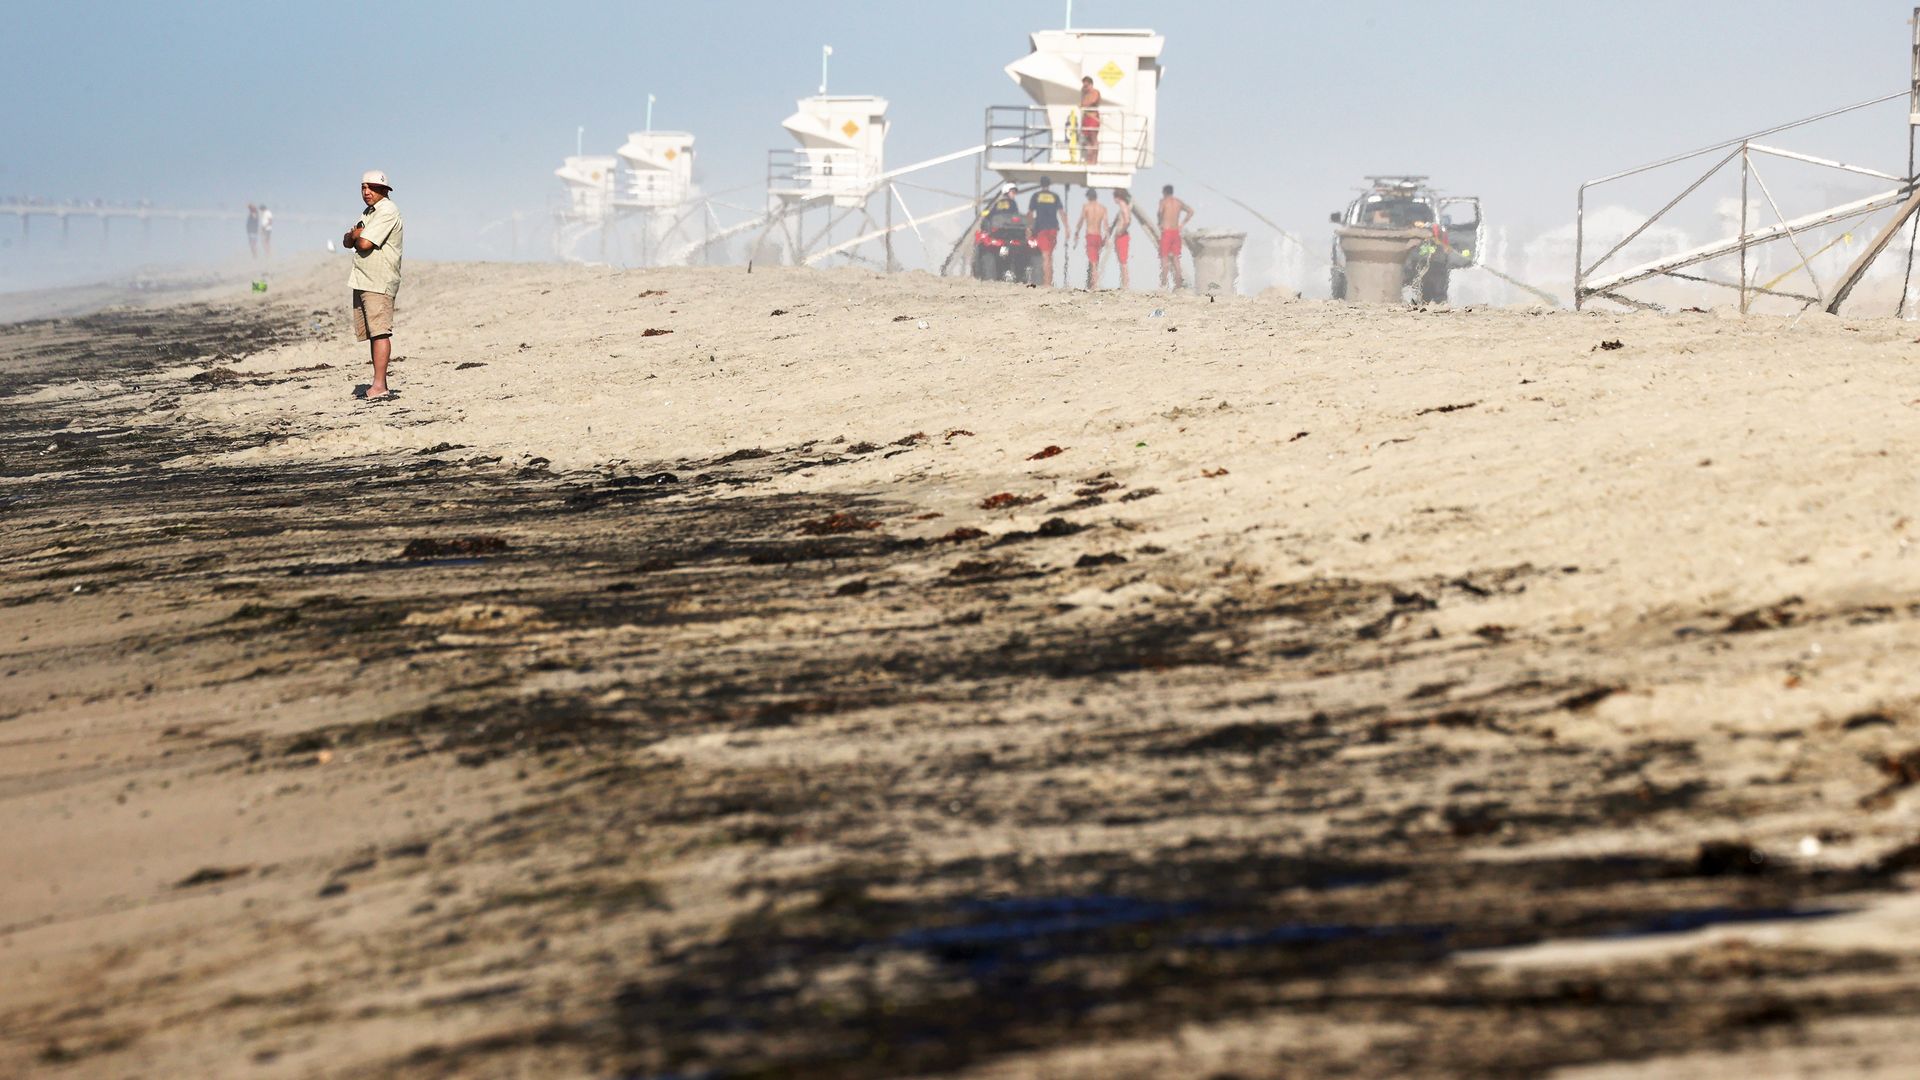   A person stands near oil washed up on Huntington State Beach after a 126,000-gallon oil spill from an offshore oil platform on October 3, 2021 in Huntington Beach, California